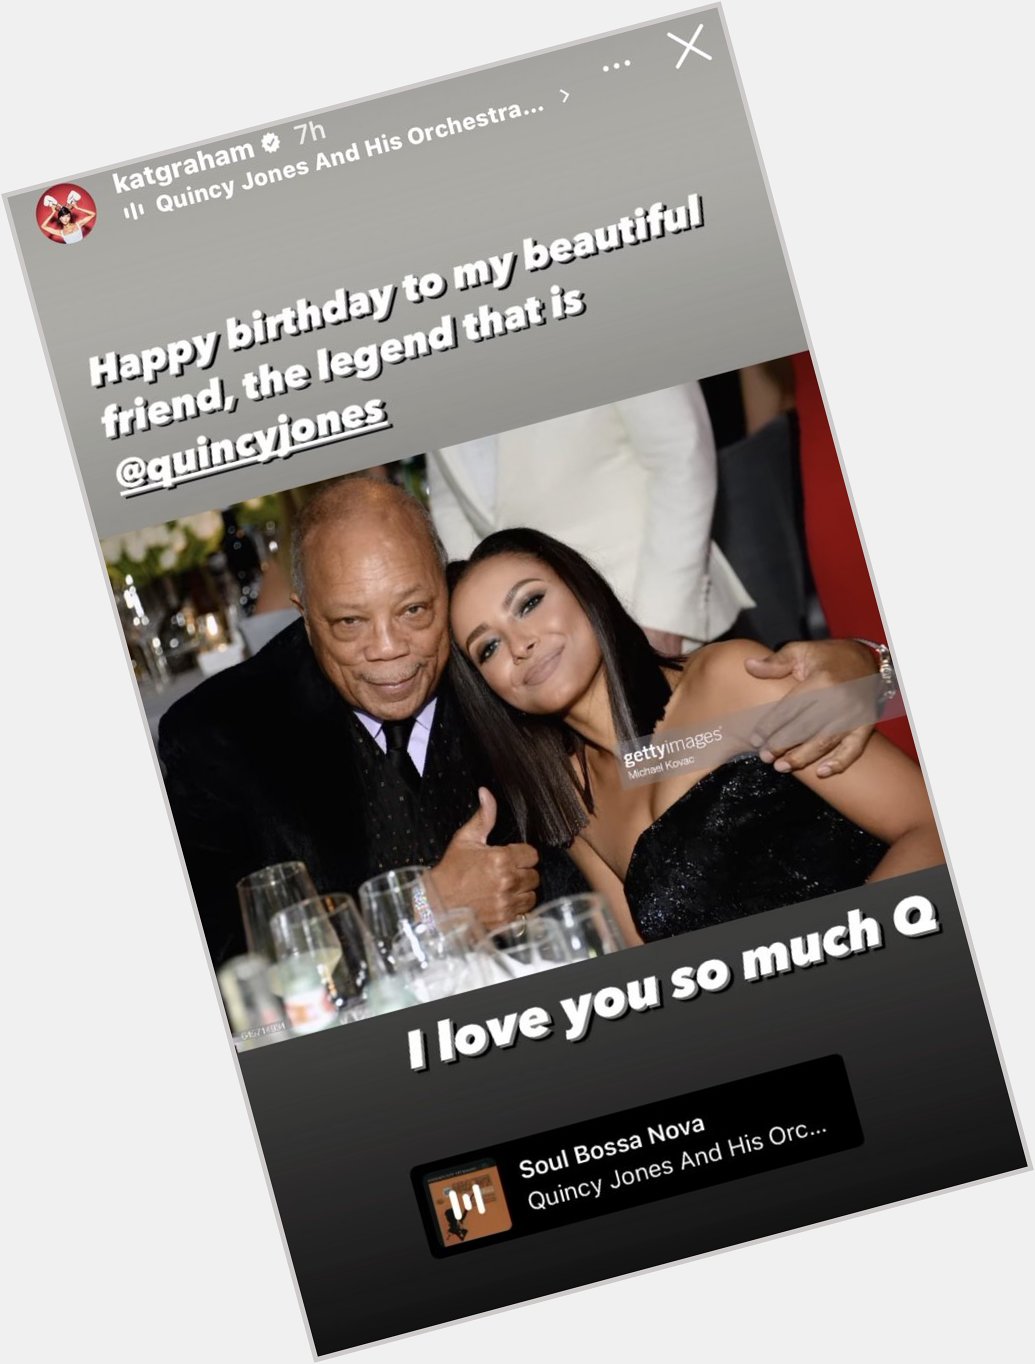 . wishes friend and musical legend, Quincy Jones, a happy birthday via Instagram stories. 